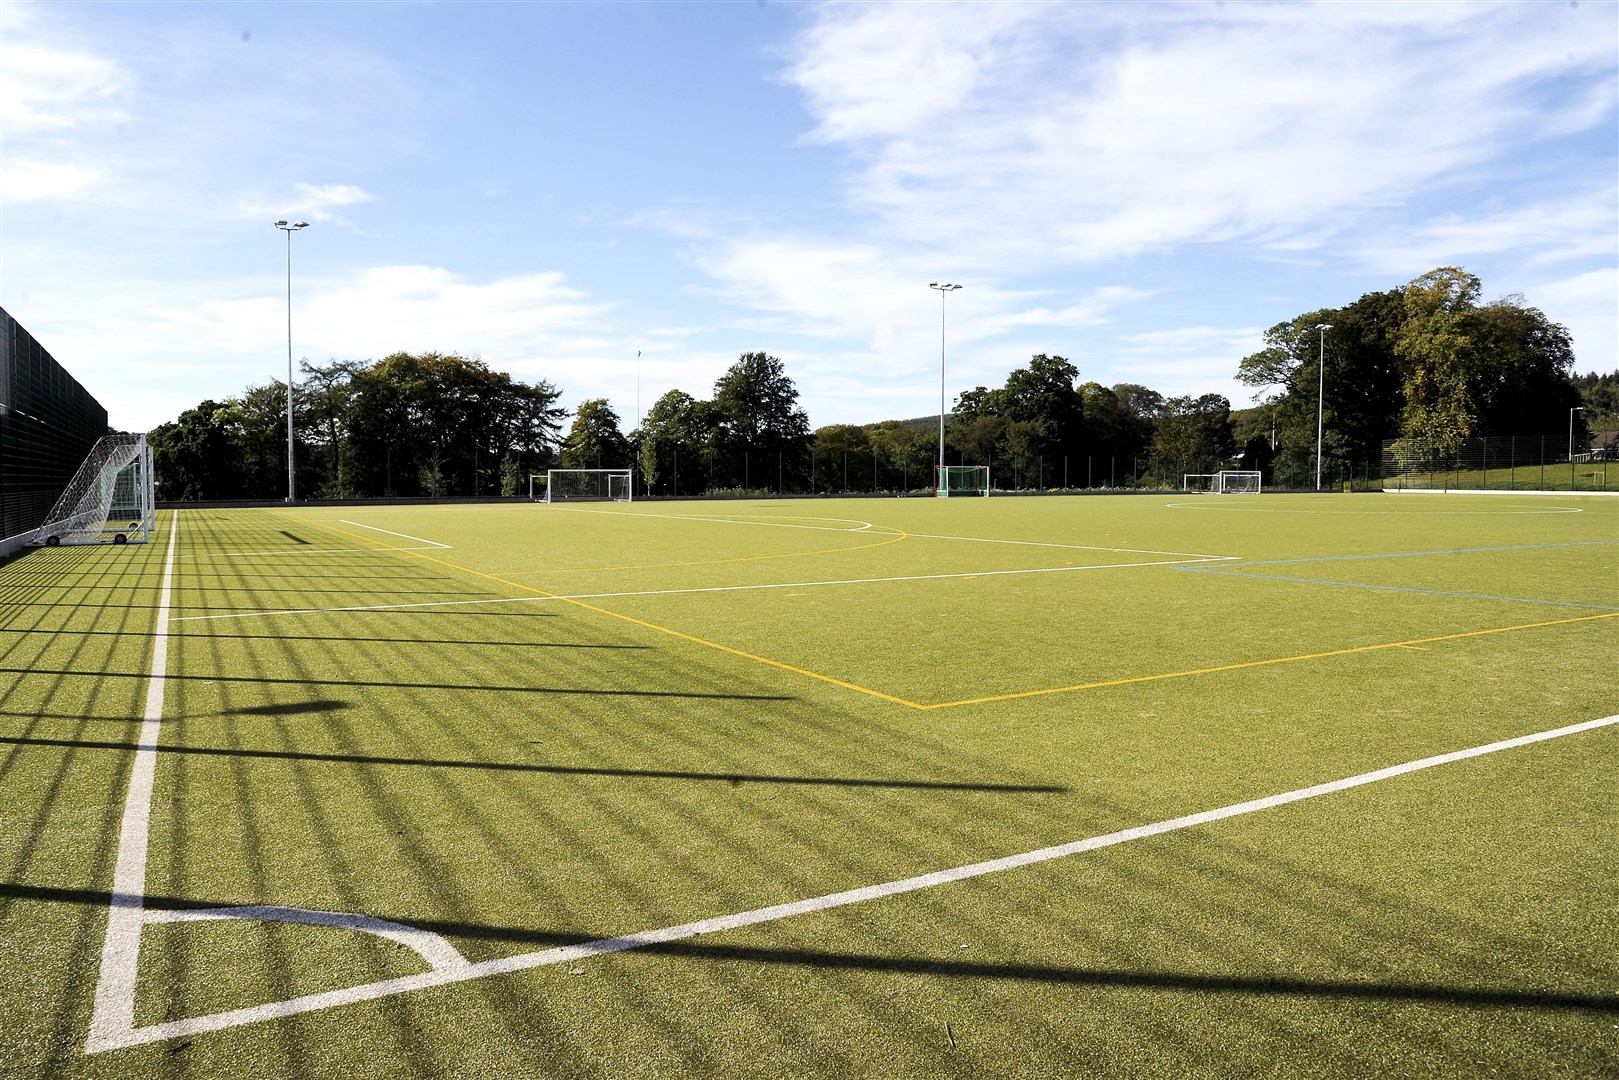 Elgin Sports Community Trust wants to build an all-weather sports surface on Common Good land at Lesser Borough Briggs through a Community Asset Transfer.